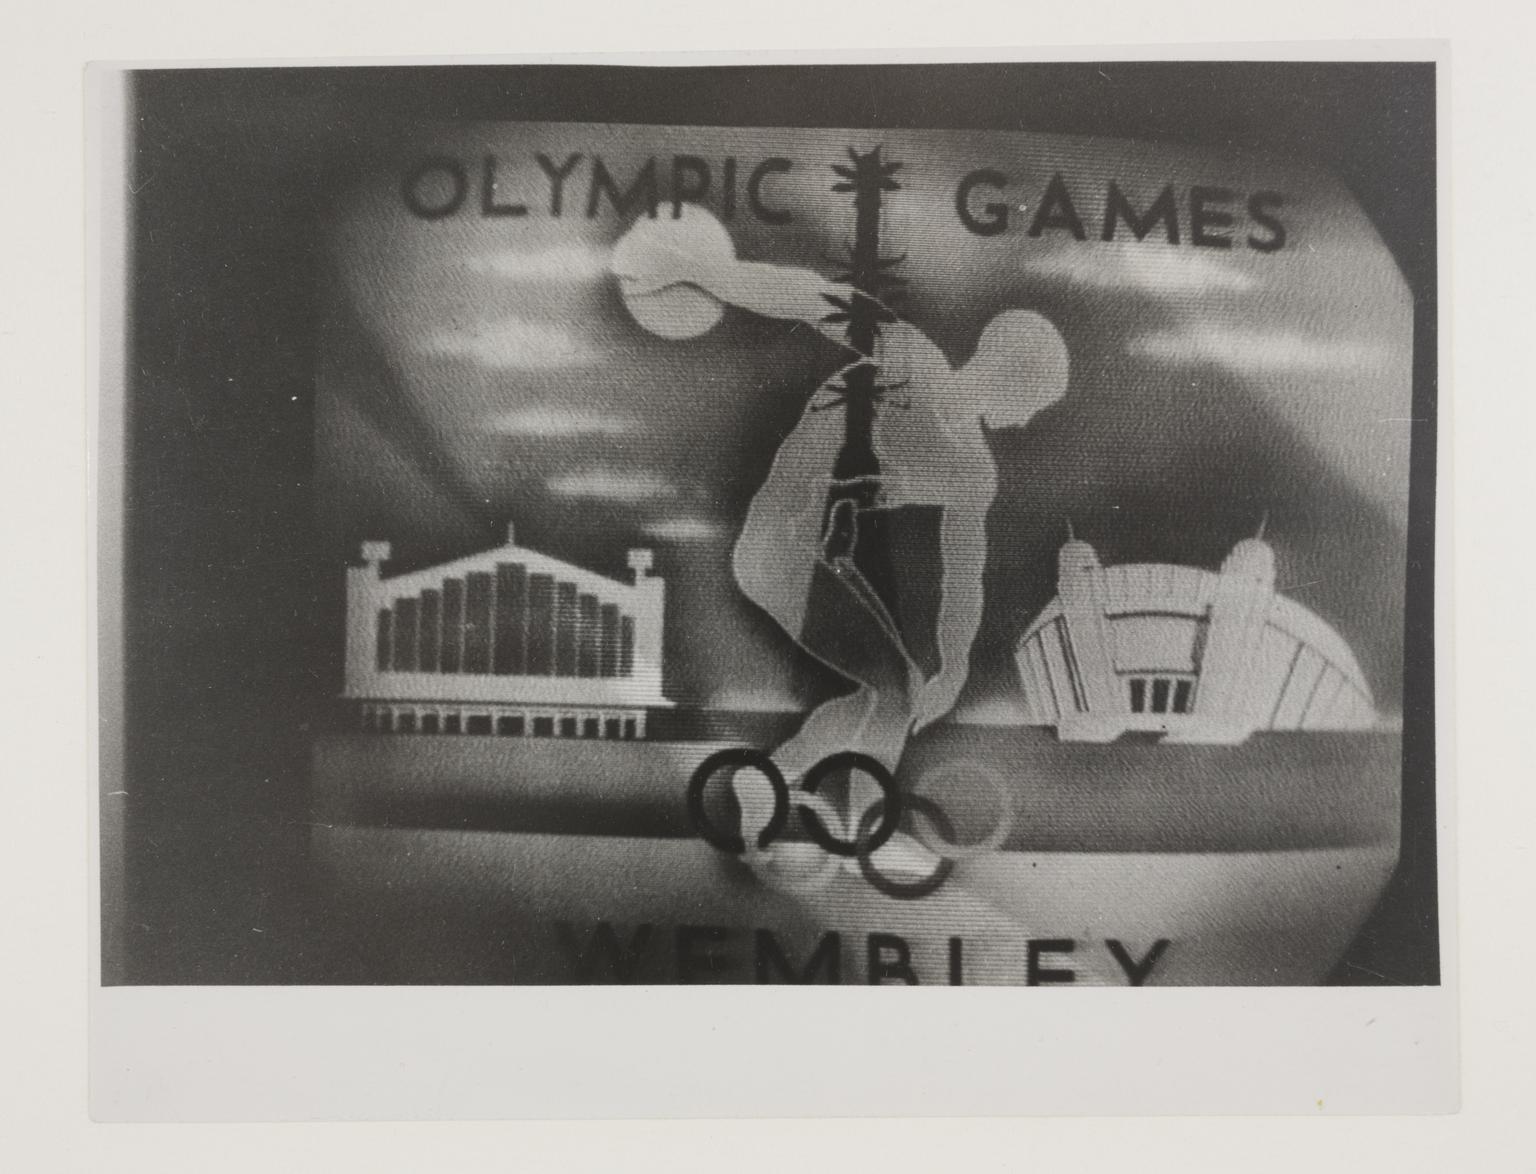 Photograph of a television receiver showing the title card for the 1948 Olympic Games